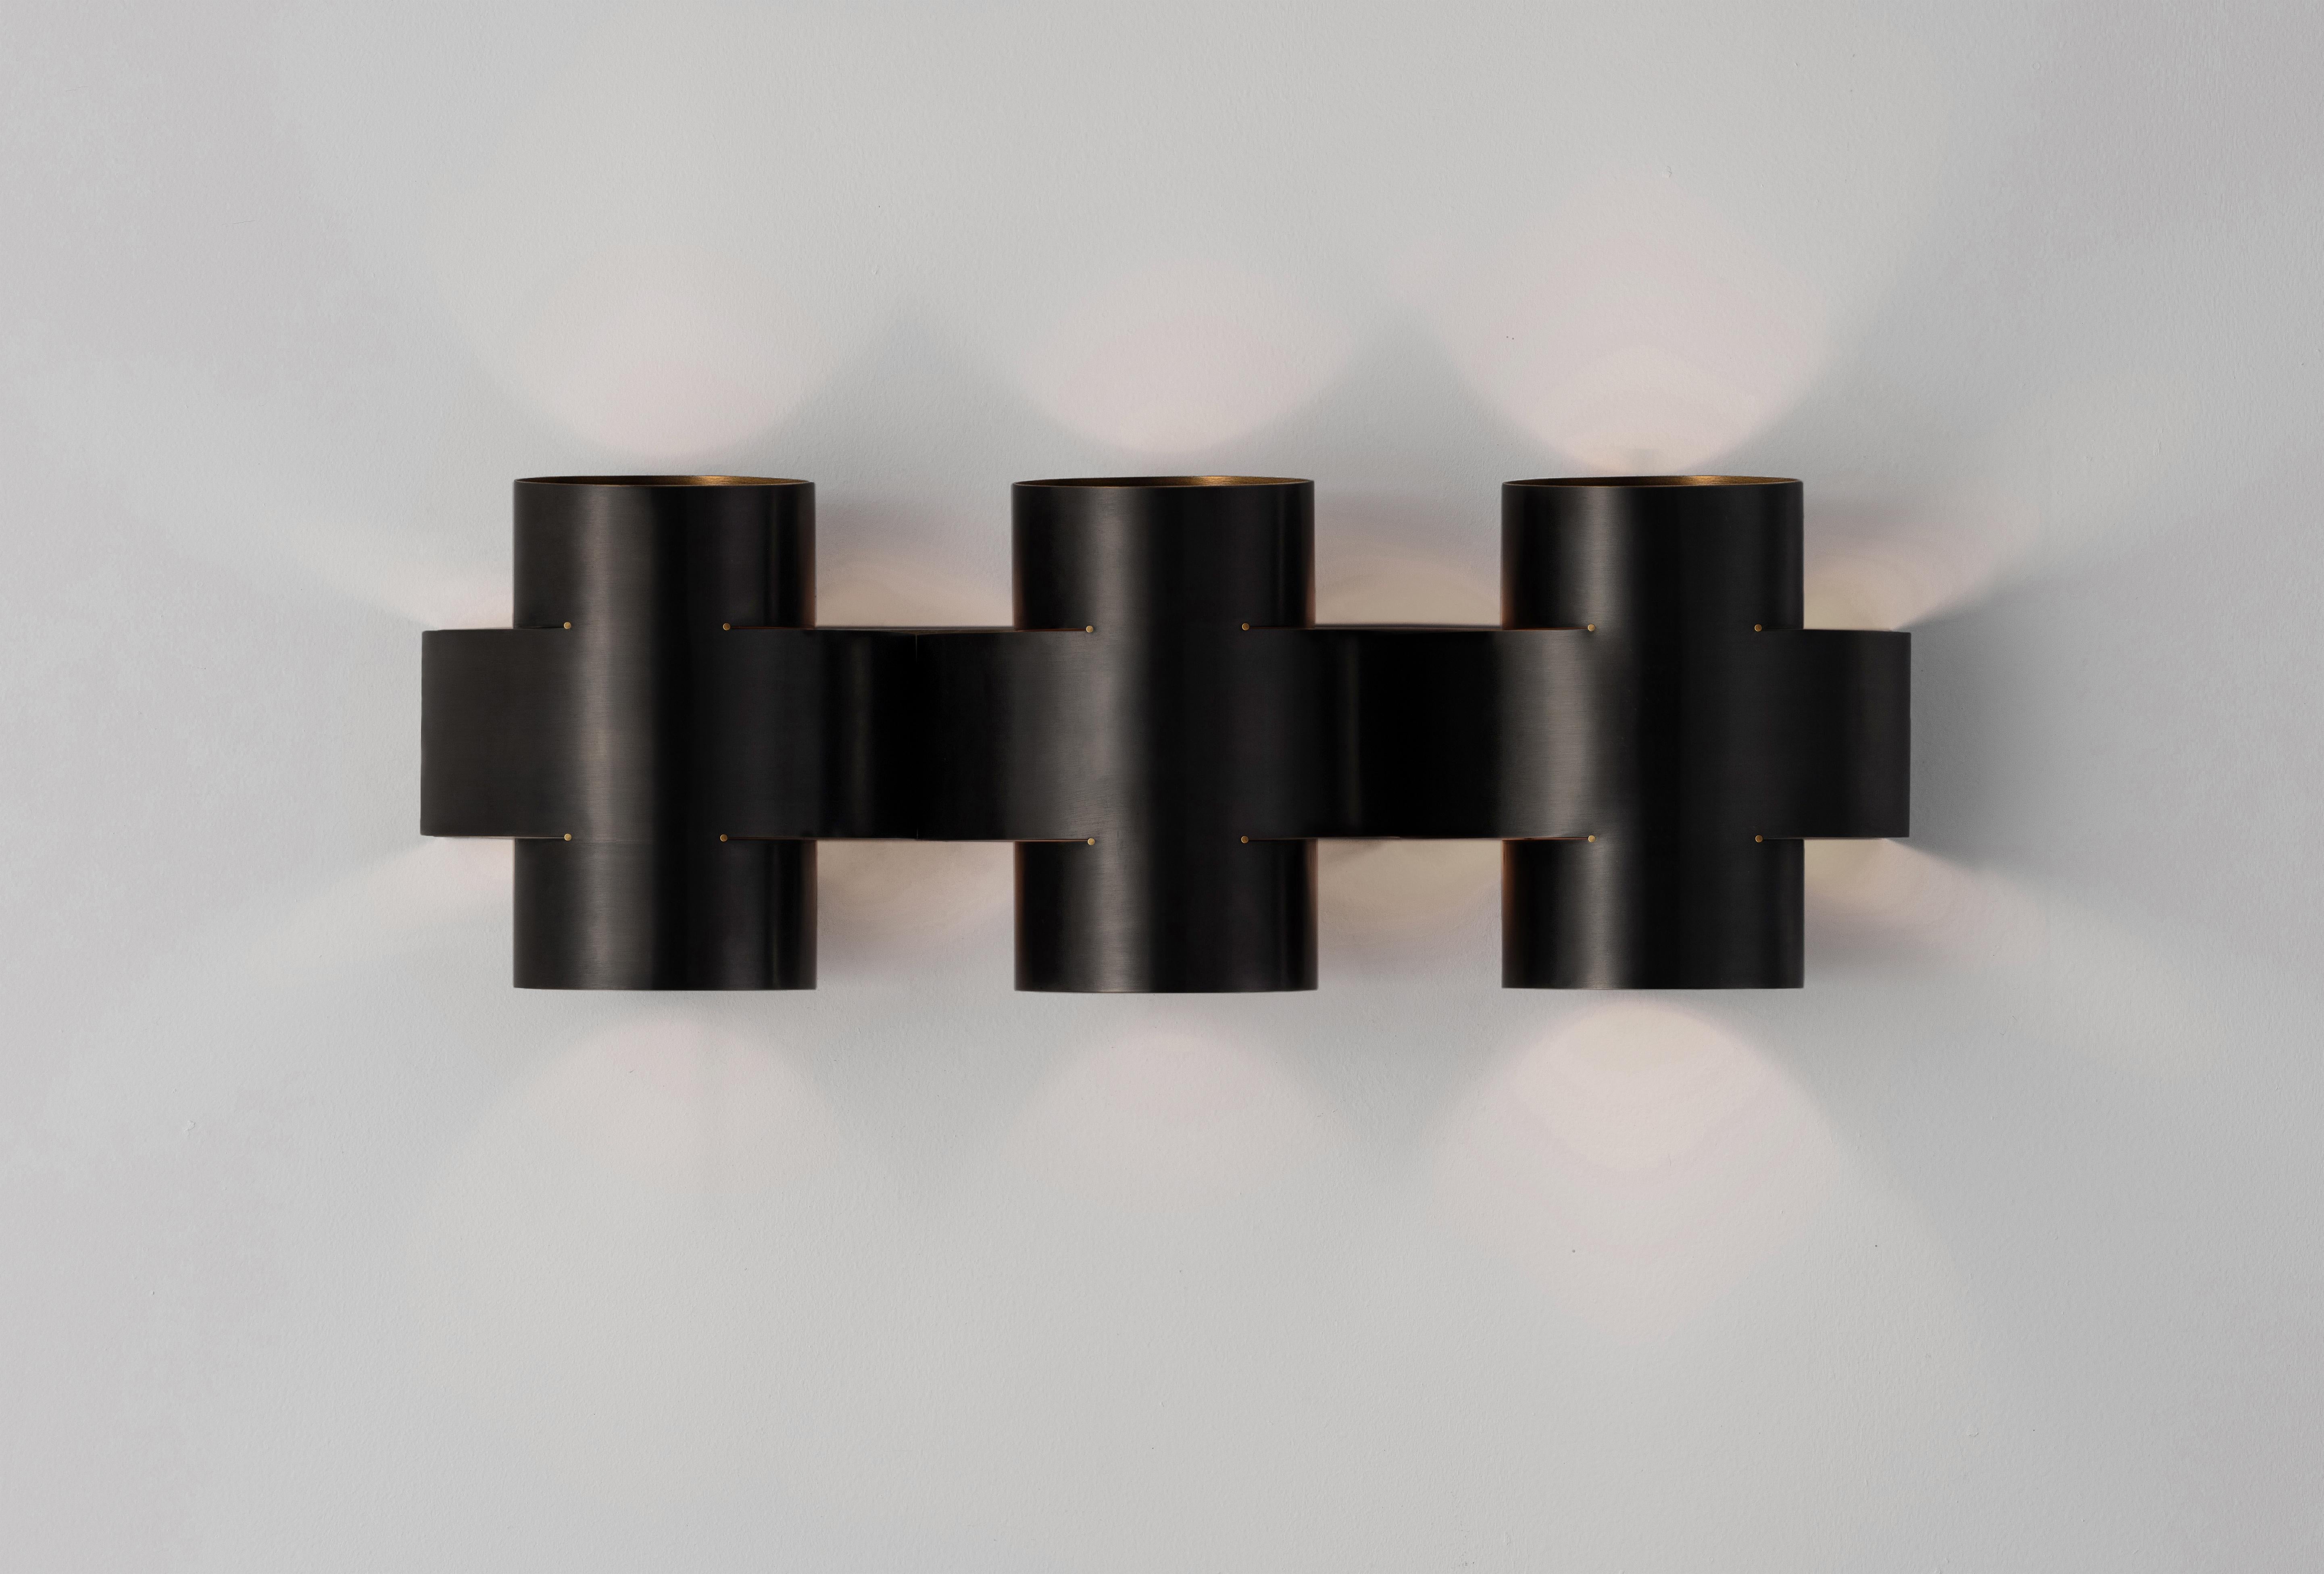 Plus three Applique by Paul Matter.
Dimensions: L 720 mm, H 254 mm, D 155 mm
1 Type E27 Base, 3W - 5W LED
Warm White, Voltage 220-240V
CE Certified
Dimmable upon request
Materials: Brass

Finished in burnt, aged, buffed brass and buffed